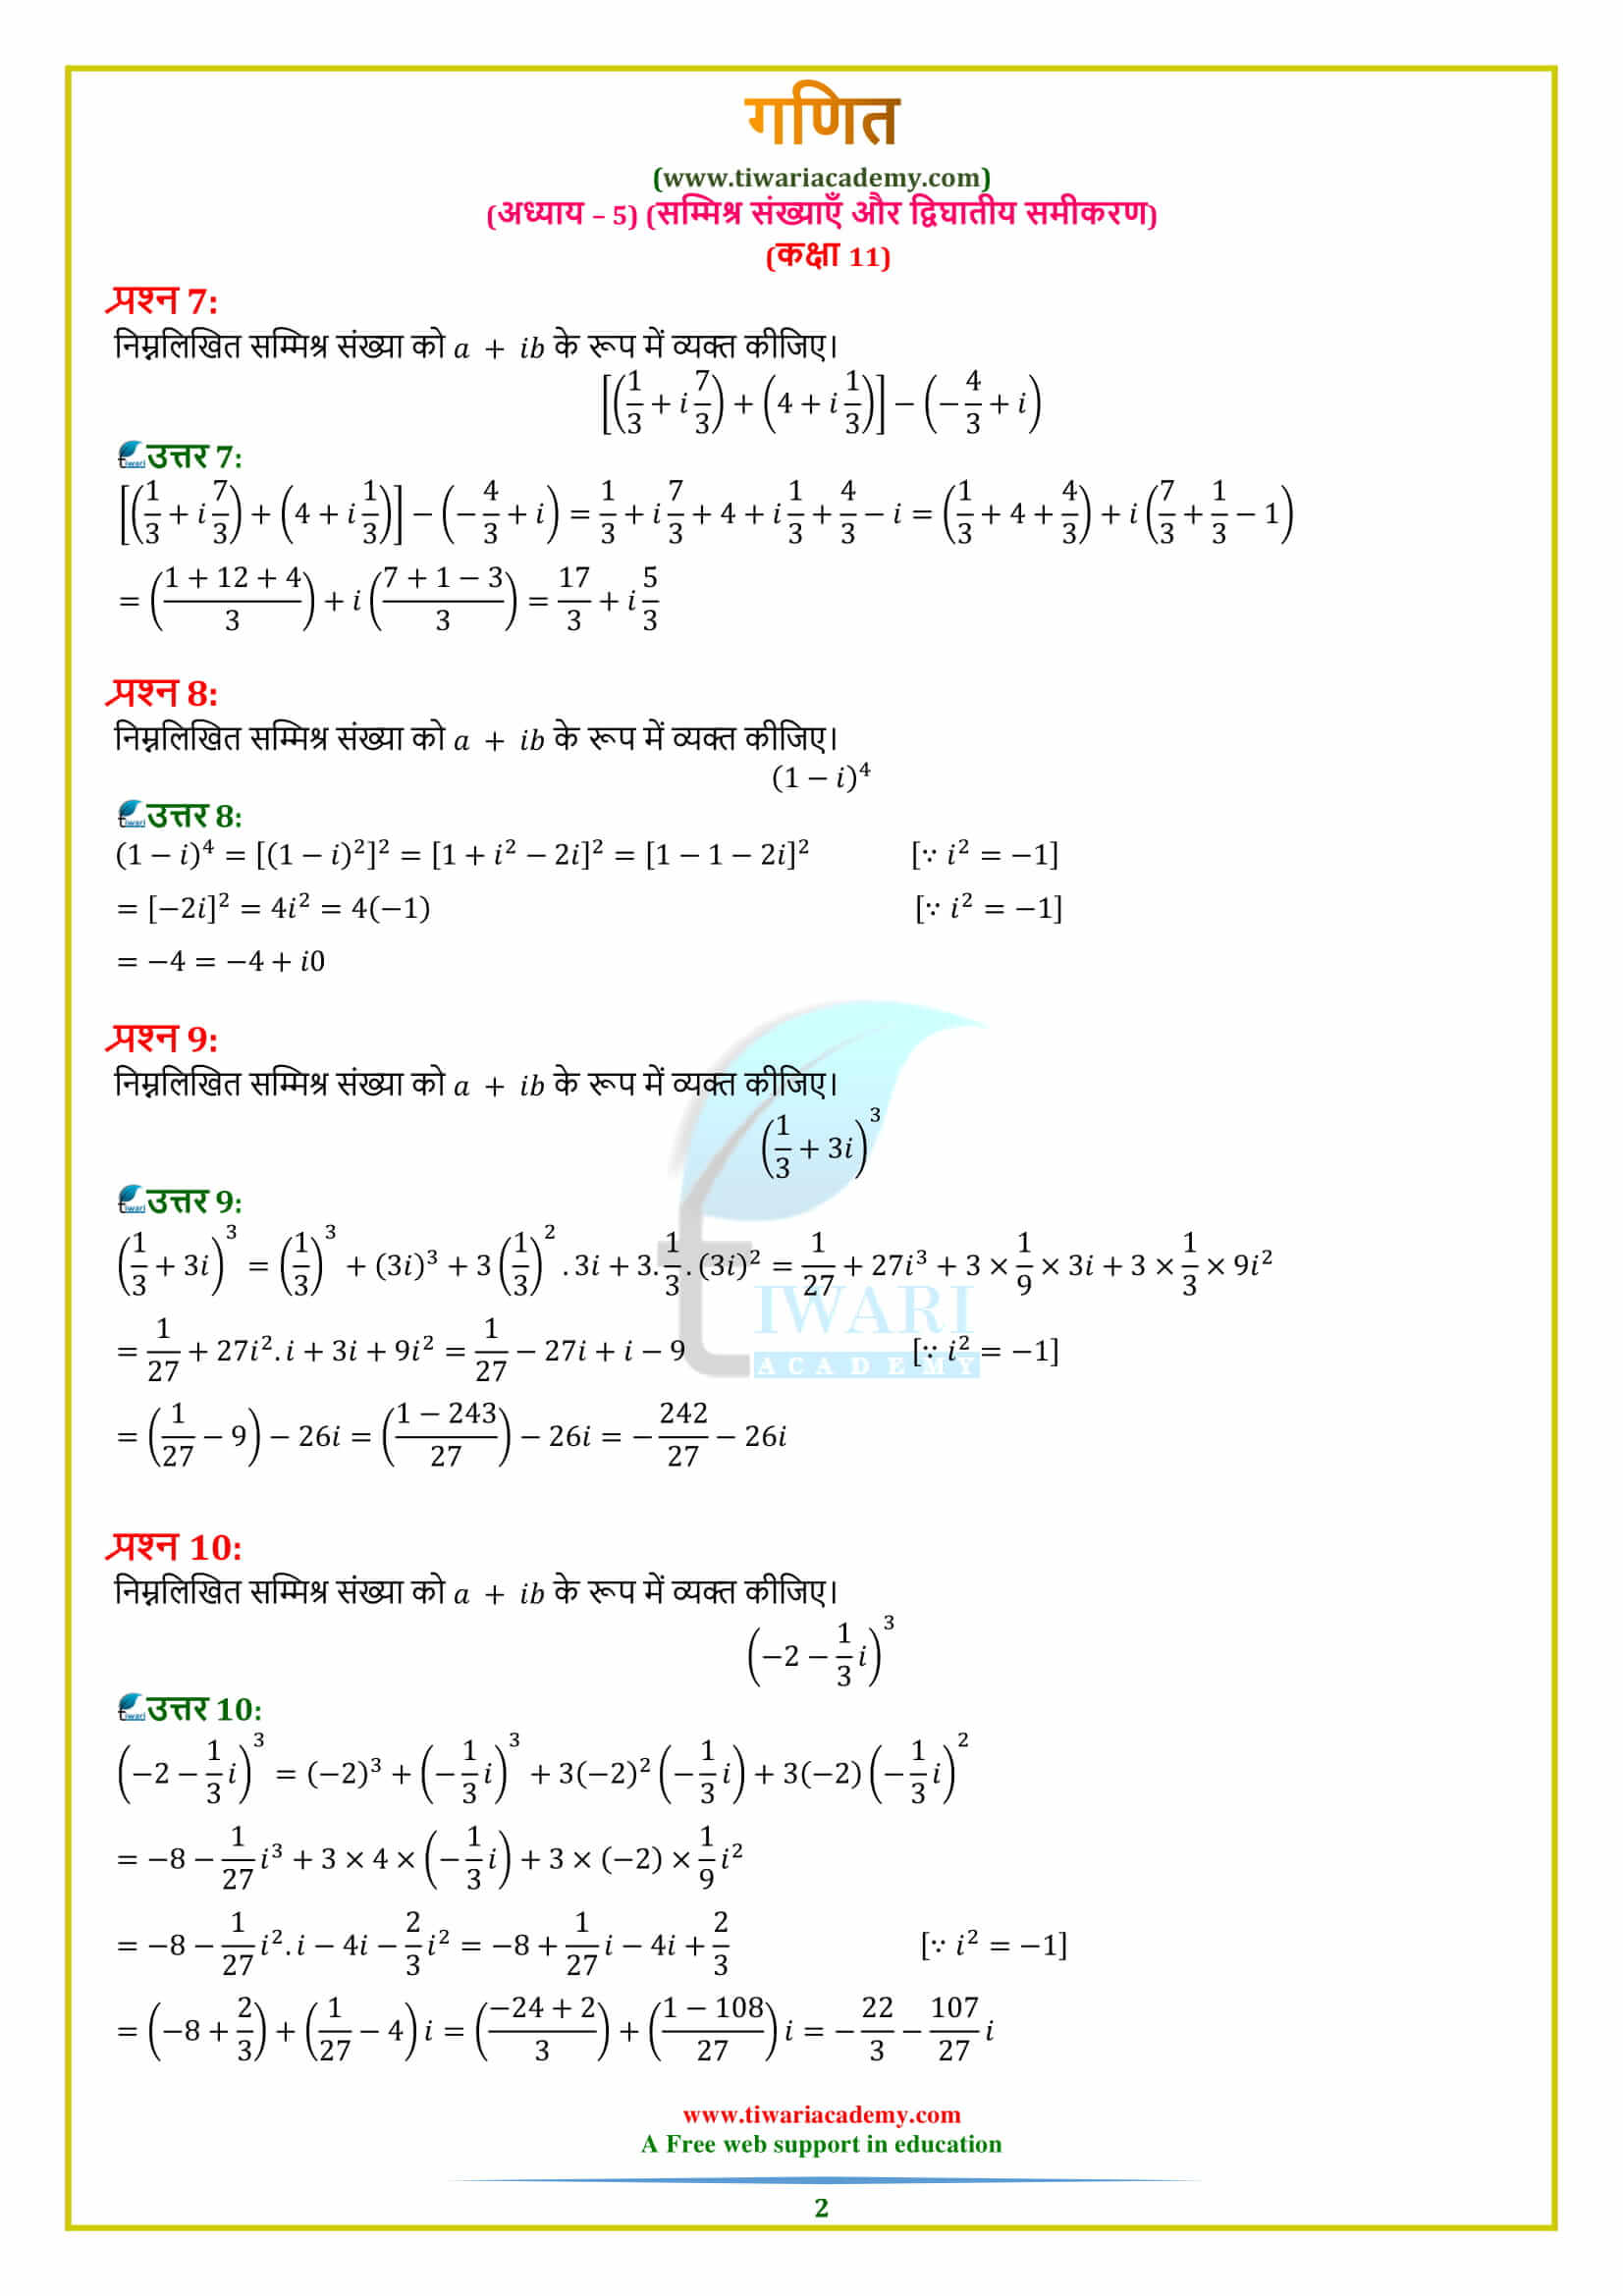 NCERT Solutions for Class 11 Maths Chapter 5 Exercise 5.1 in pdf